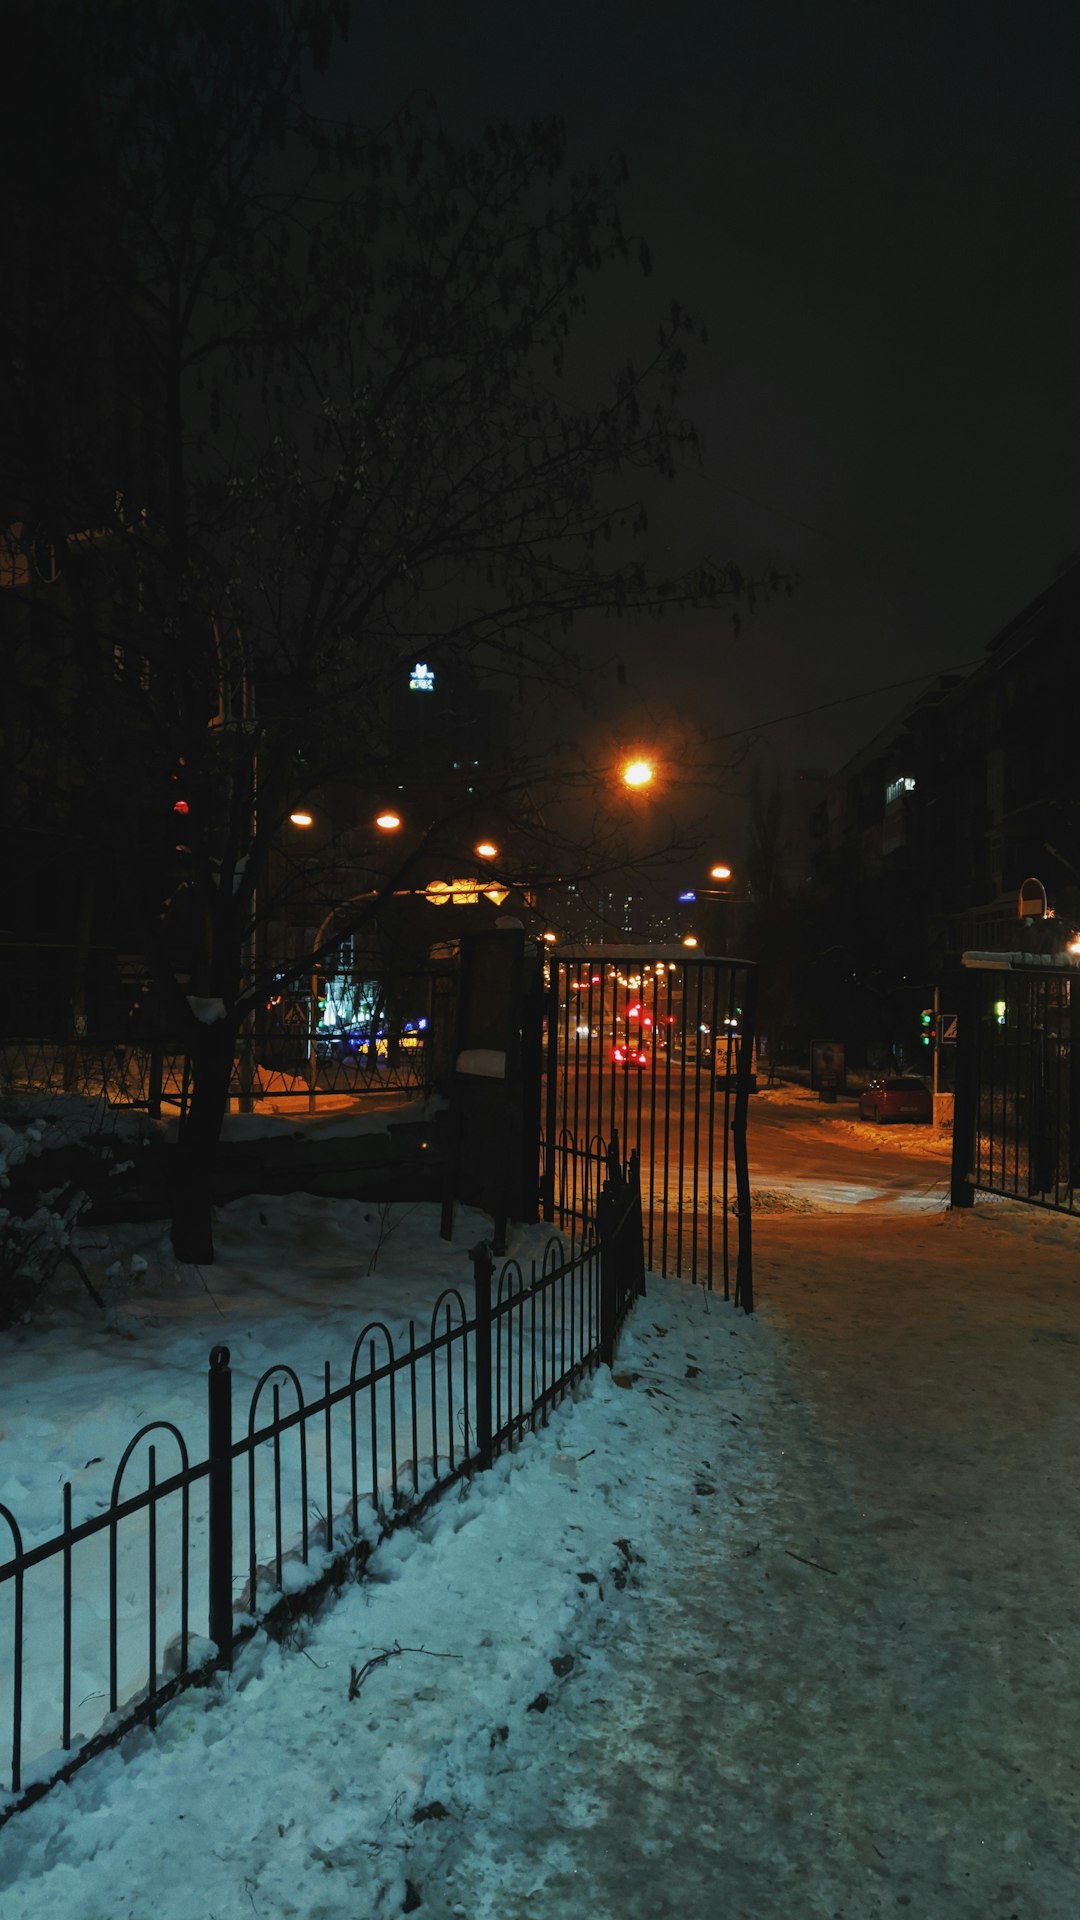 black metal fence on snow covered ground during night time